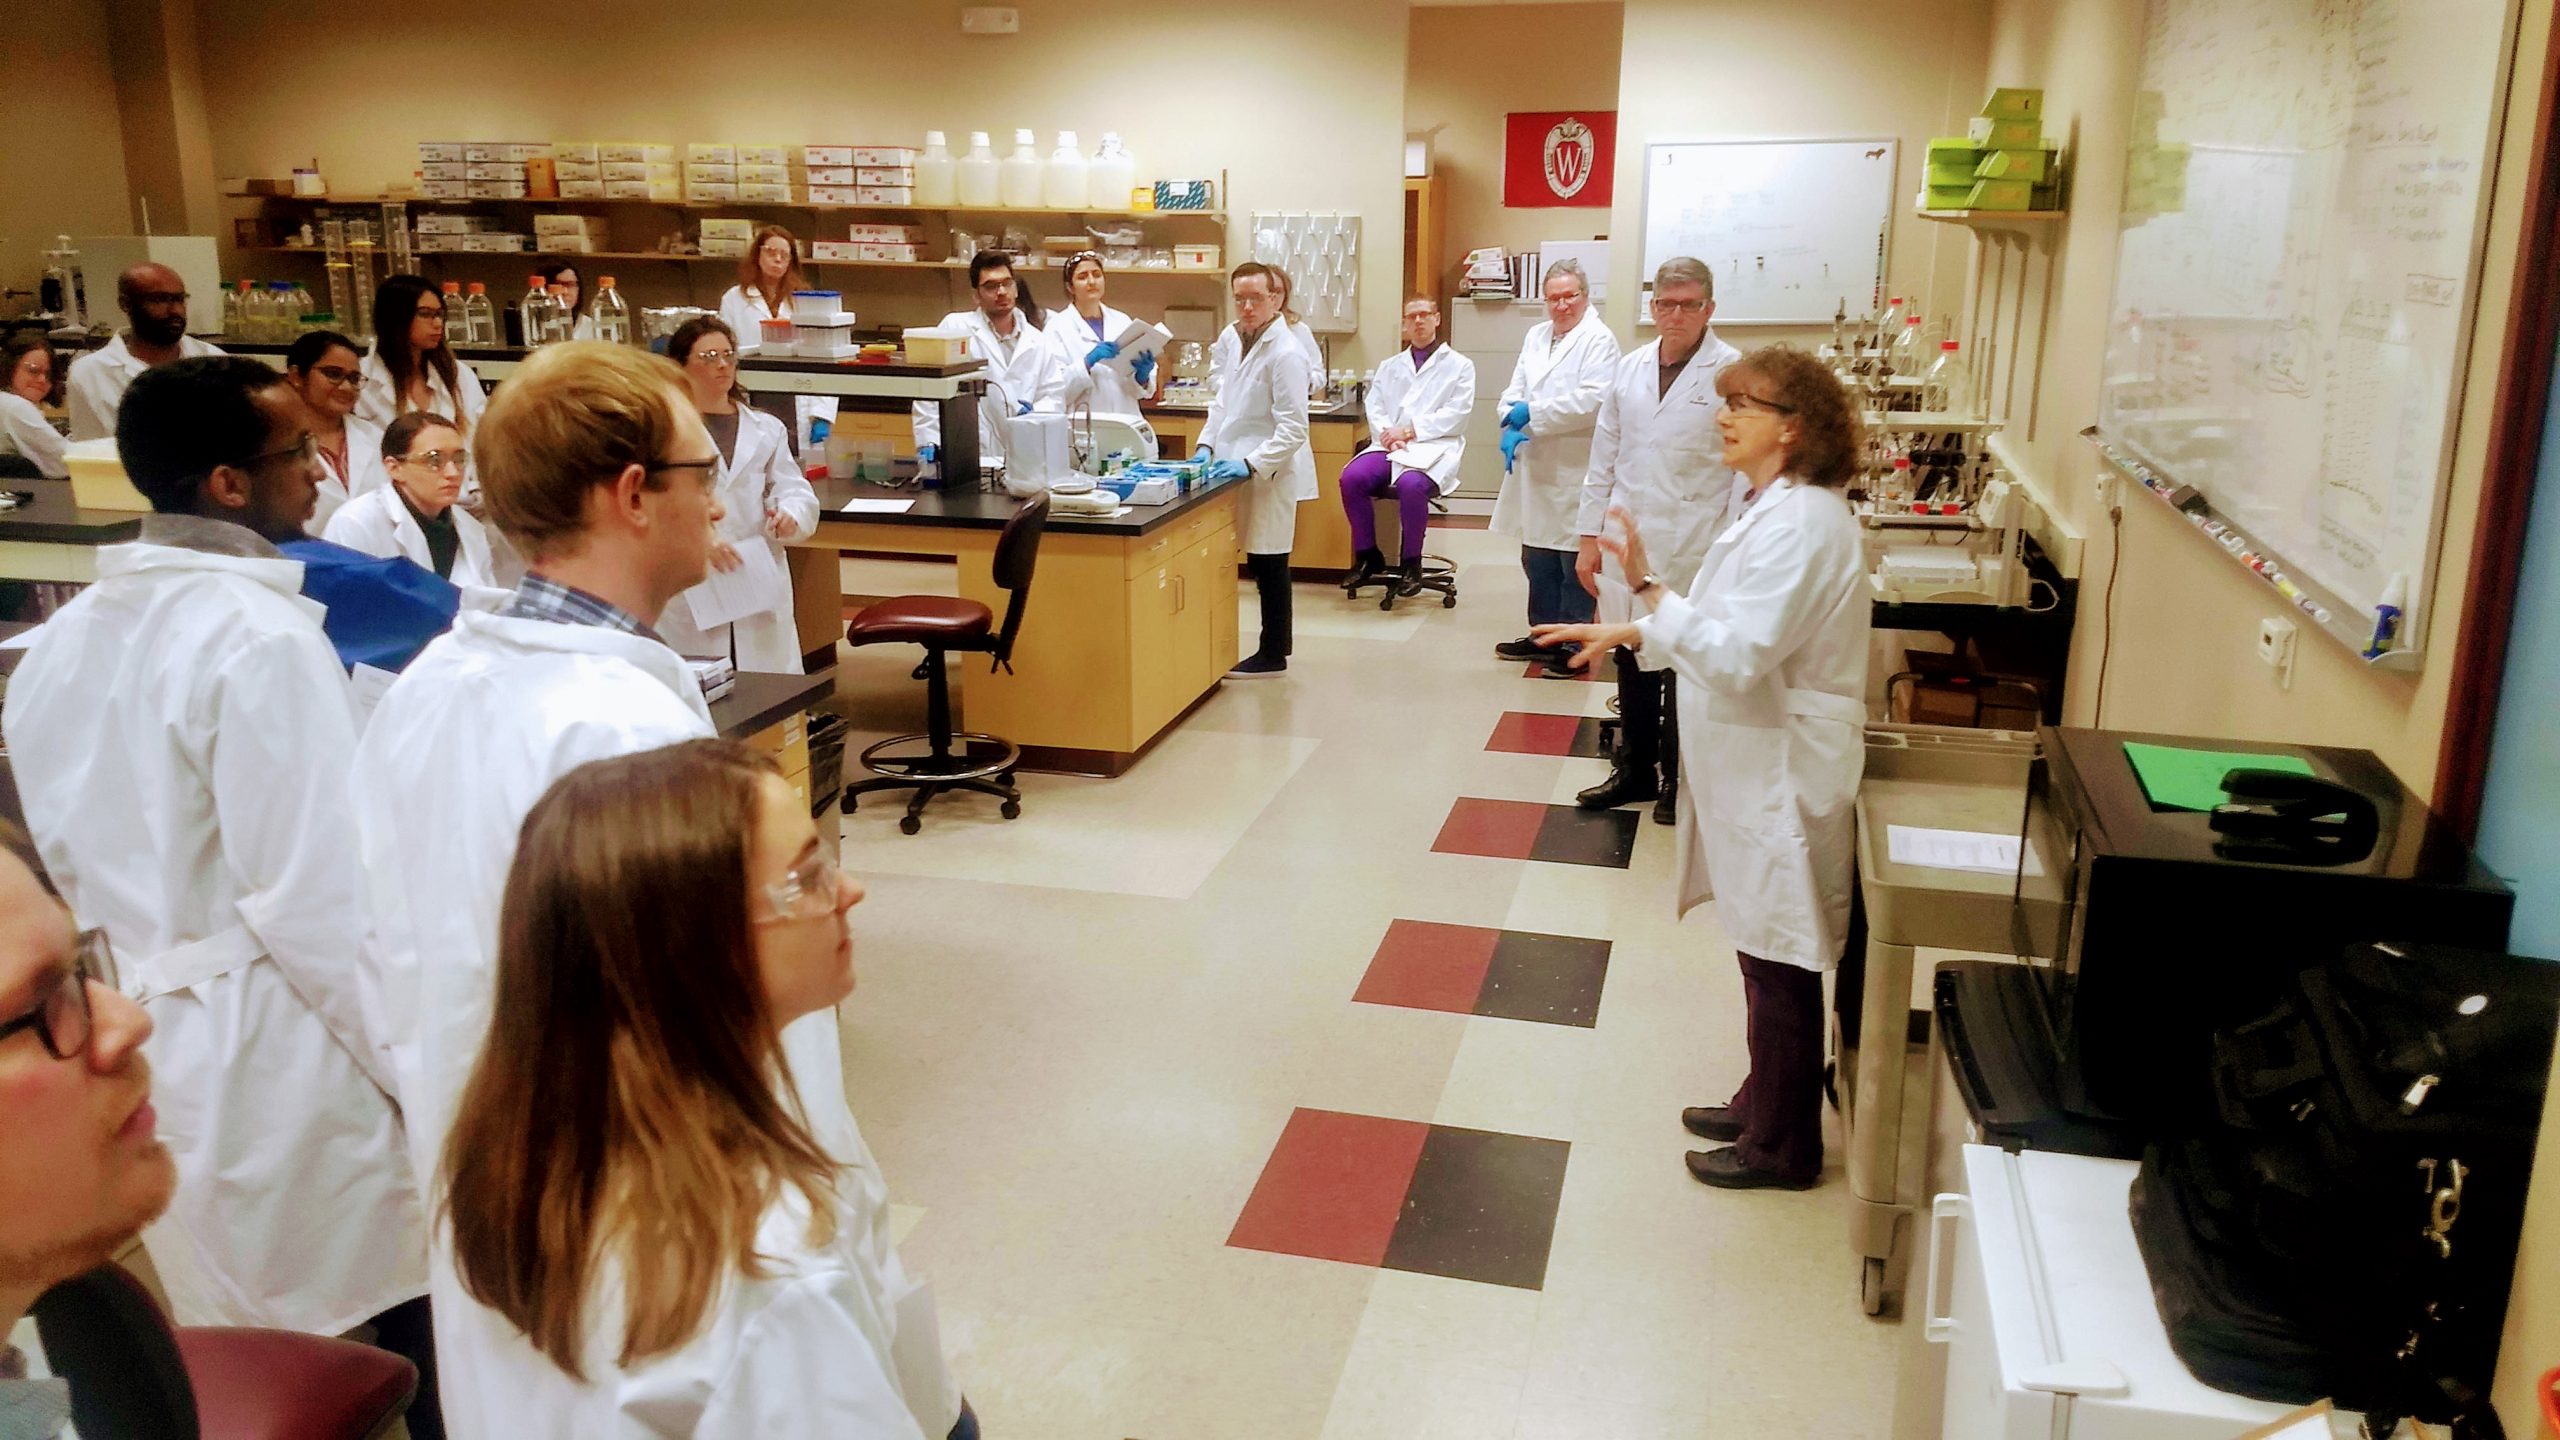 20 years in, biotech Master’s program pays dividends for Wisconsin